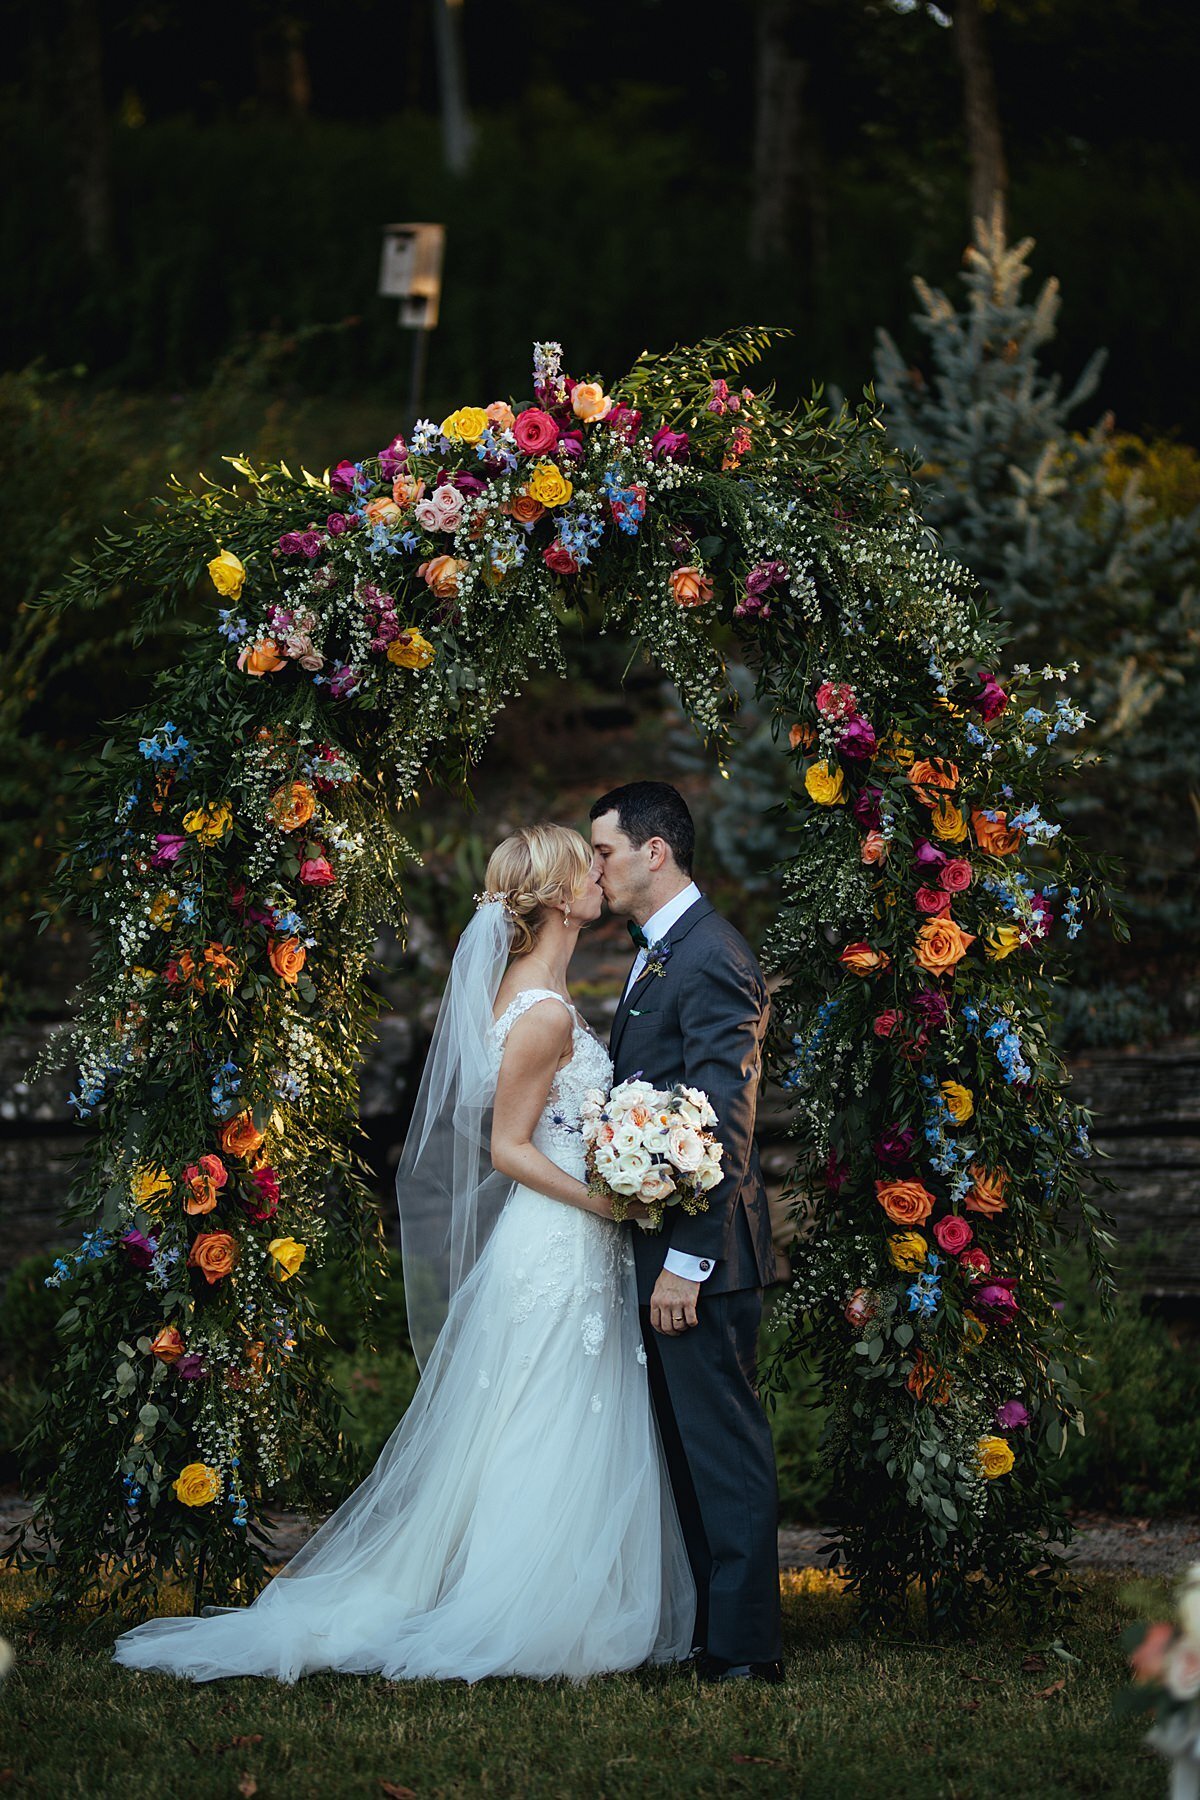 The bride, wearing a long veil and long lace wedding gown kisses the groom in a charcoal gray suit while holding a large white and blush bouquet in front of a brightly colored floral arbor with yellow, hot pink, blue, purple, white, ivory, red and orange flowers at Cheekwood Botanical Garden